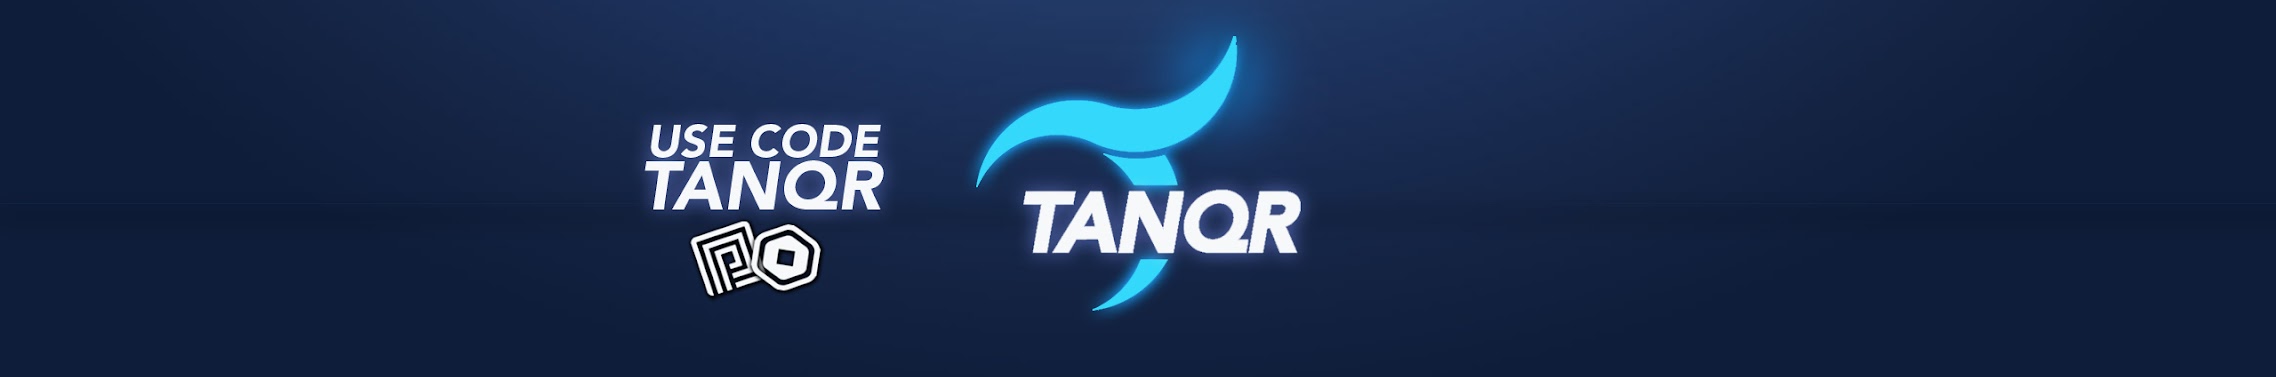 Tanqr Youtube Channel Analytics And Report Powered By